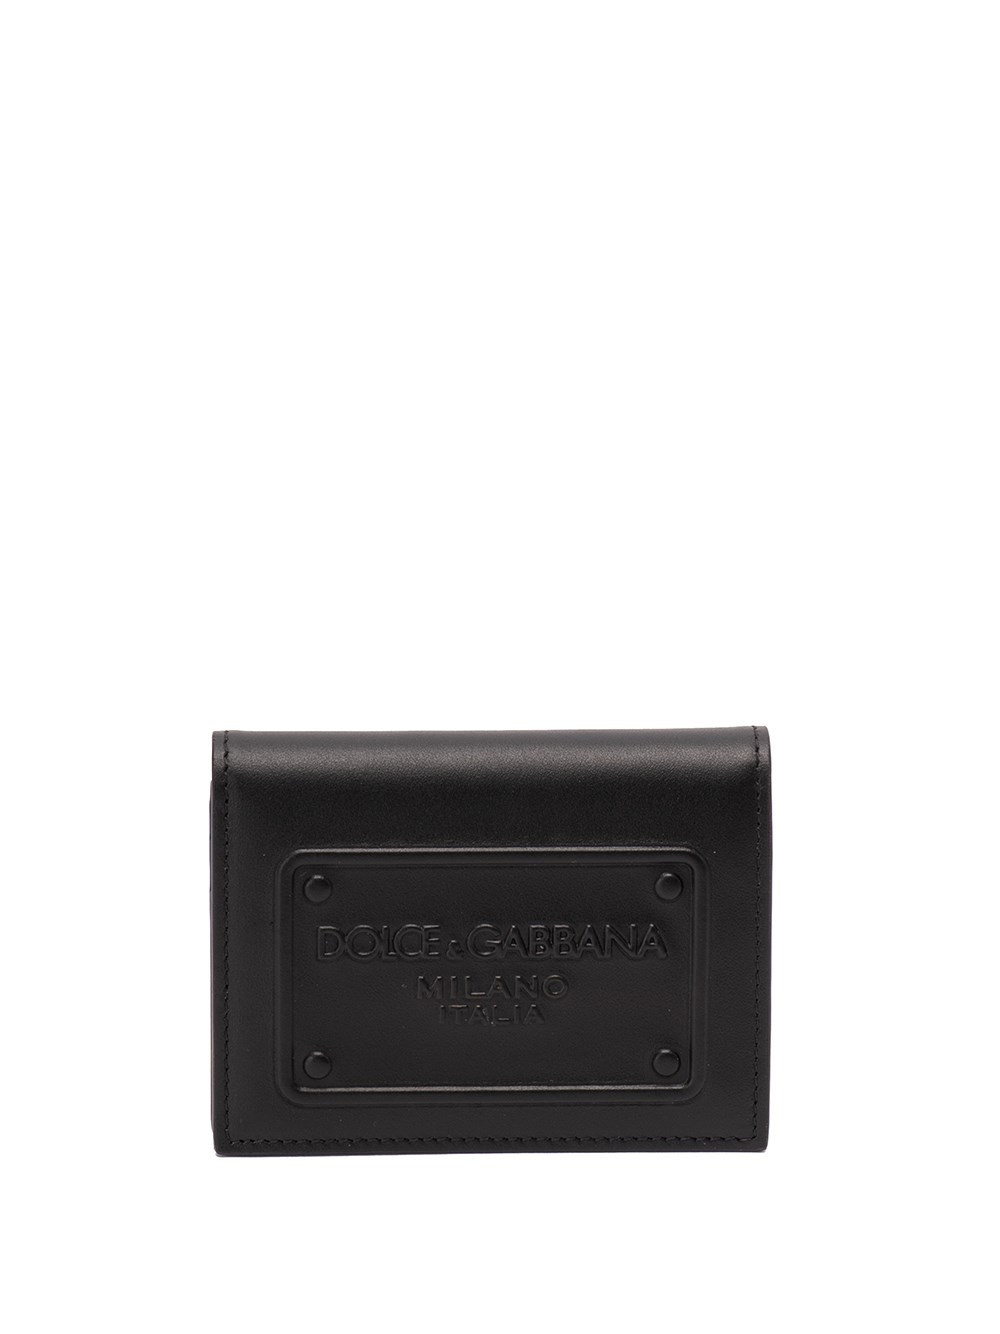 Dolce & Gabbana Card Case With Embossed Plaque In Black  